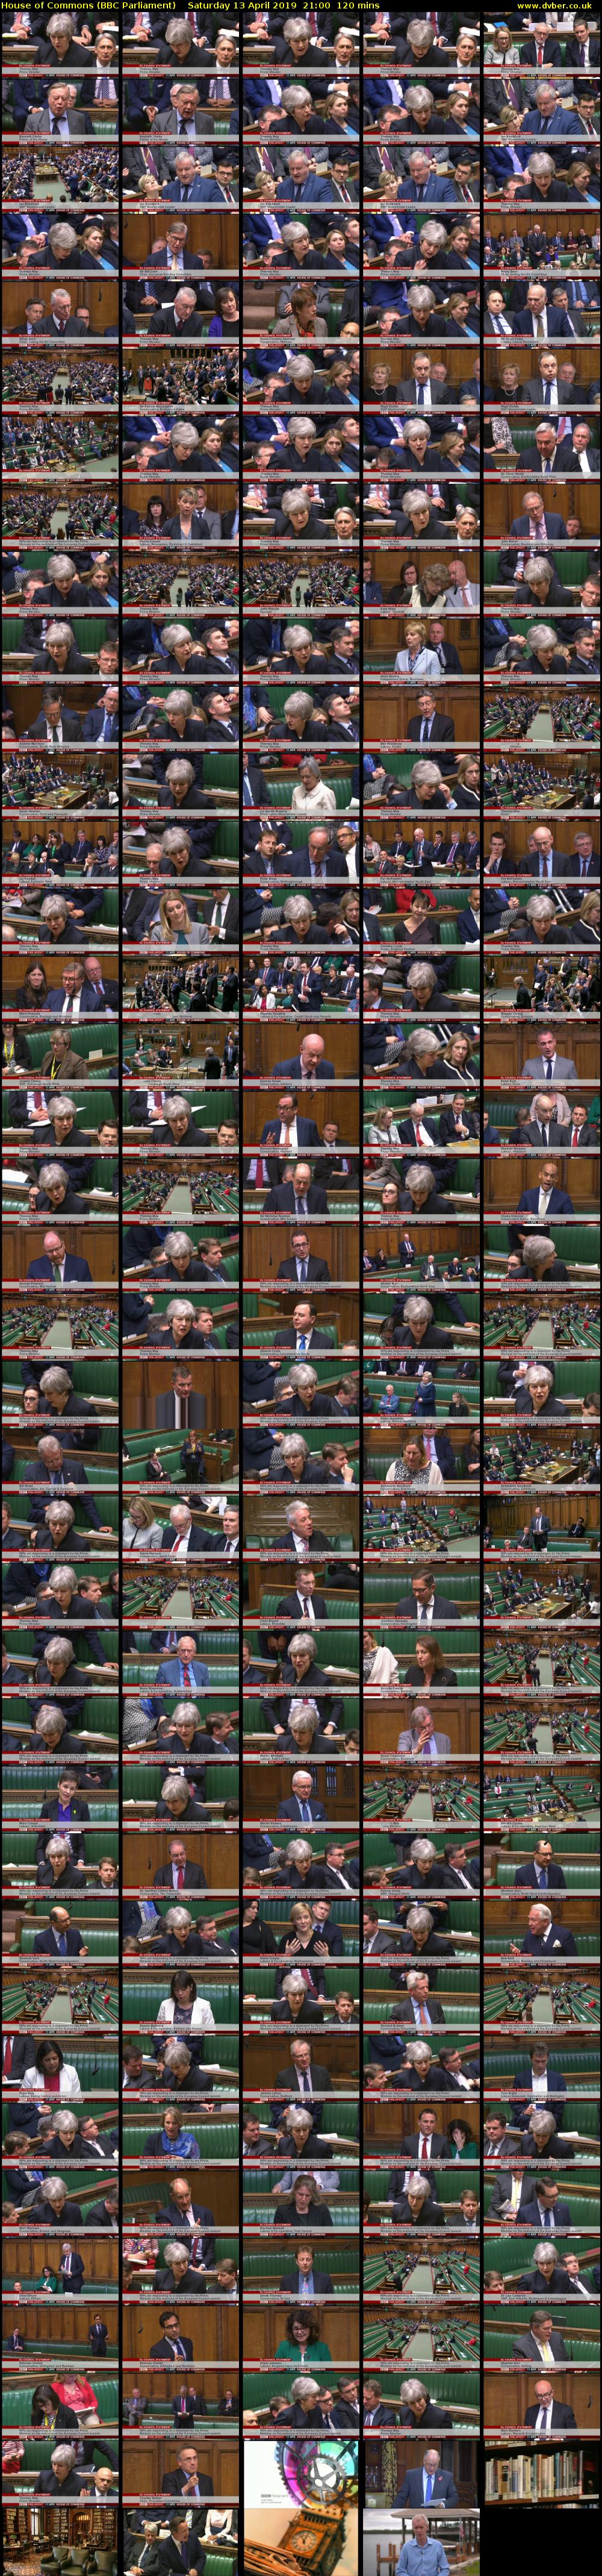 House of Commons (BBC Parliament) Saturday 13 April 2019 21:00 - 23:00